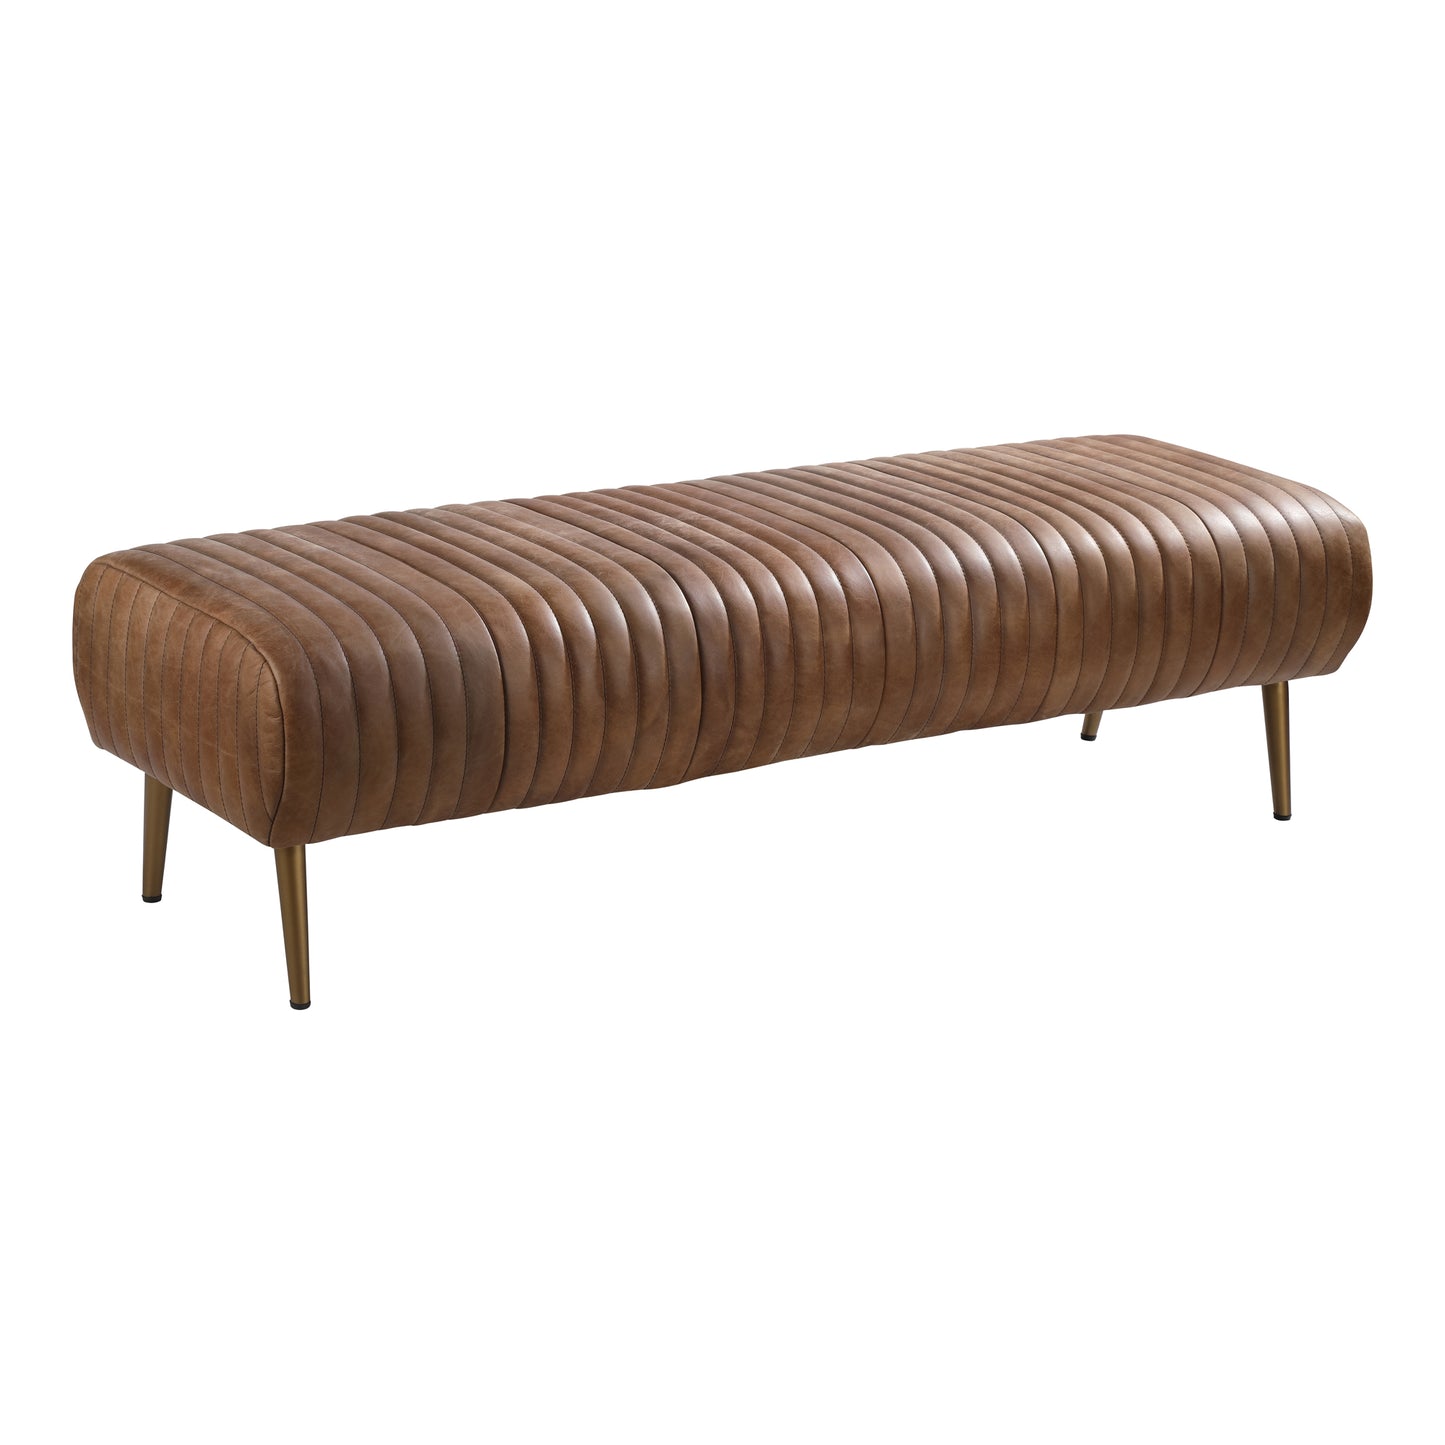 Endora Bench Open Road Brown Leather